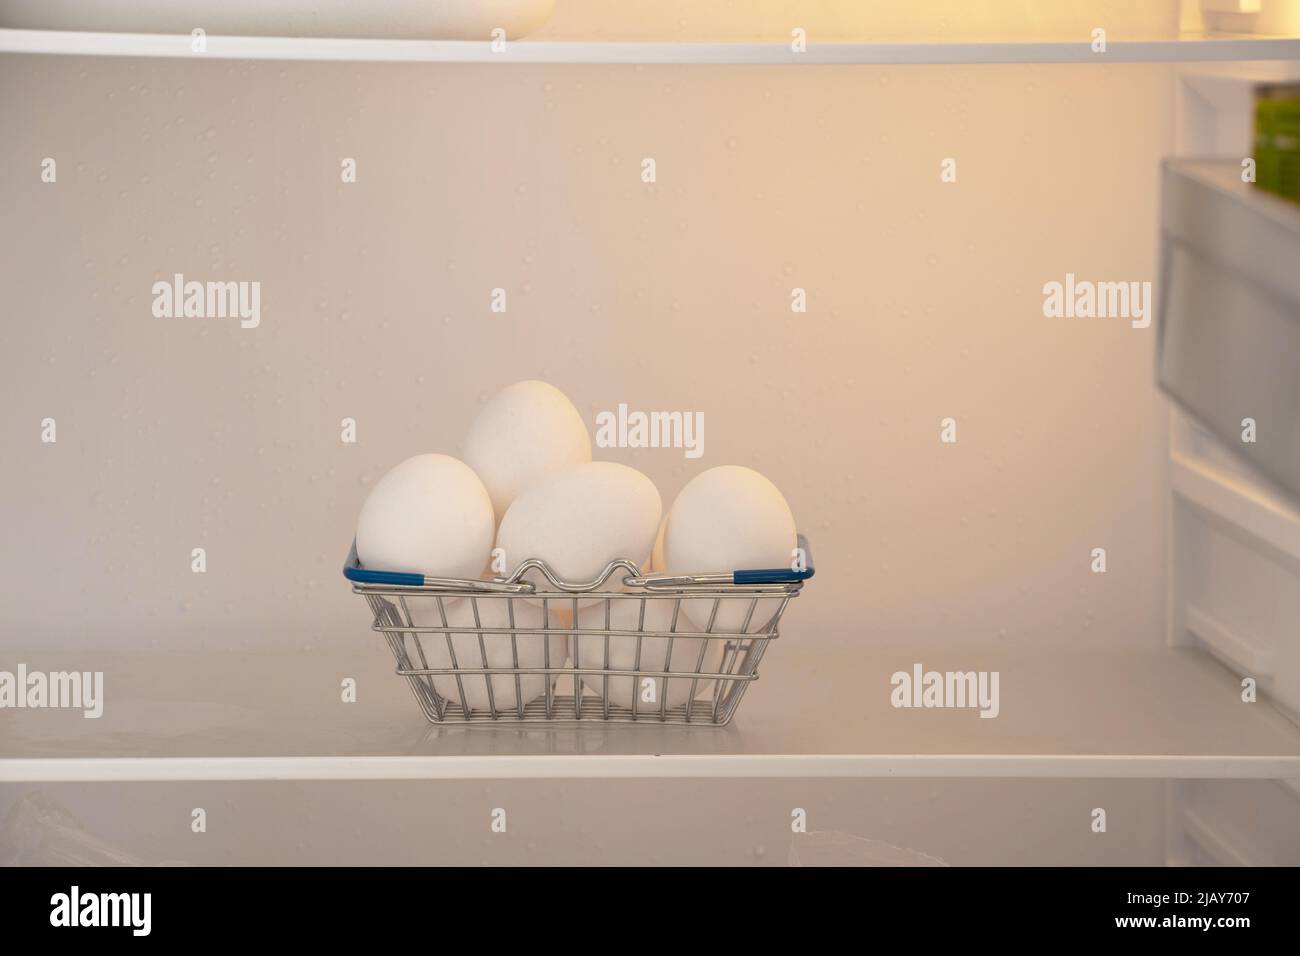 A basket from a supermarket with chicken white eggs on a shelf in the refrigerator, food in the refrigerator on the shelf Stock Photo